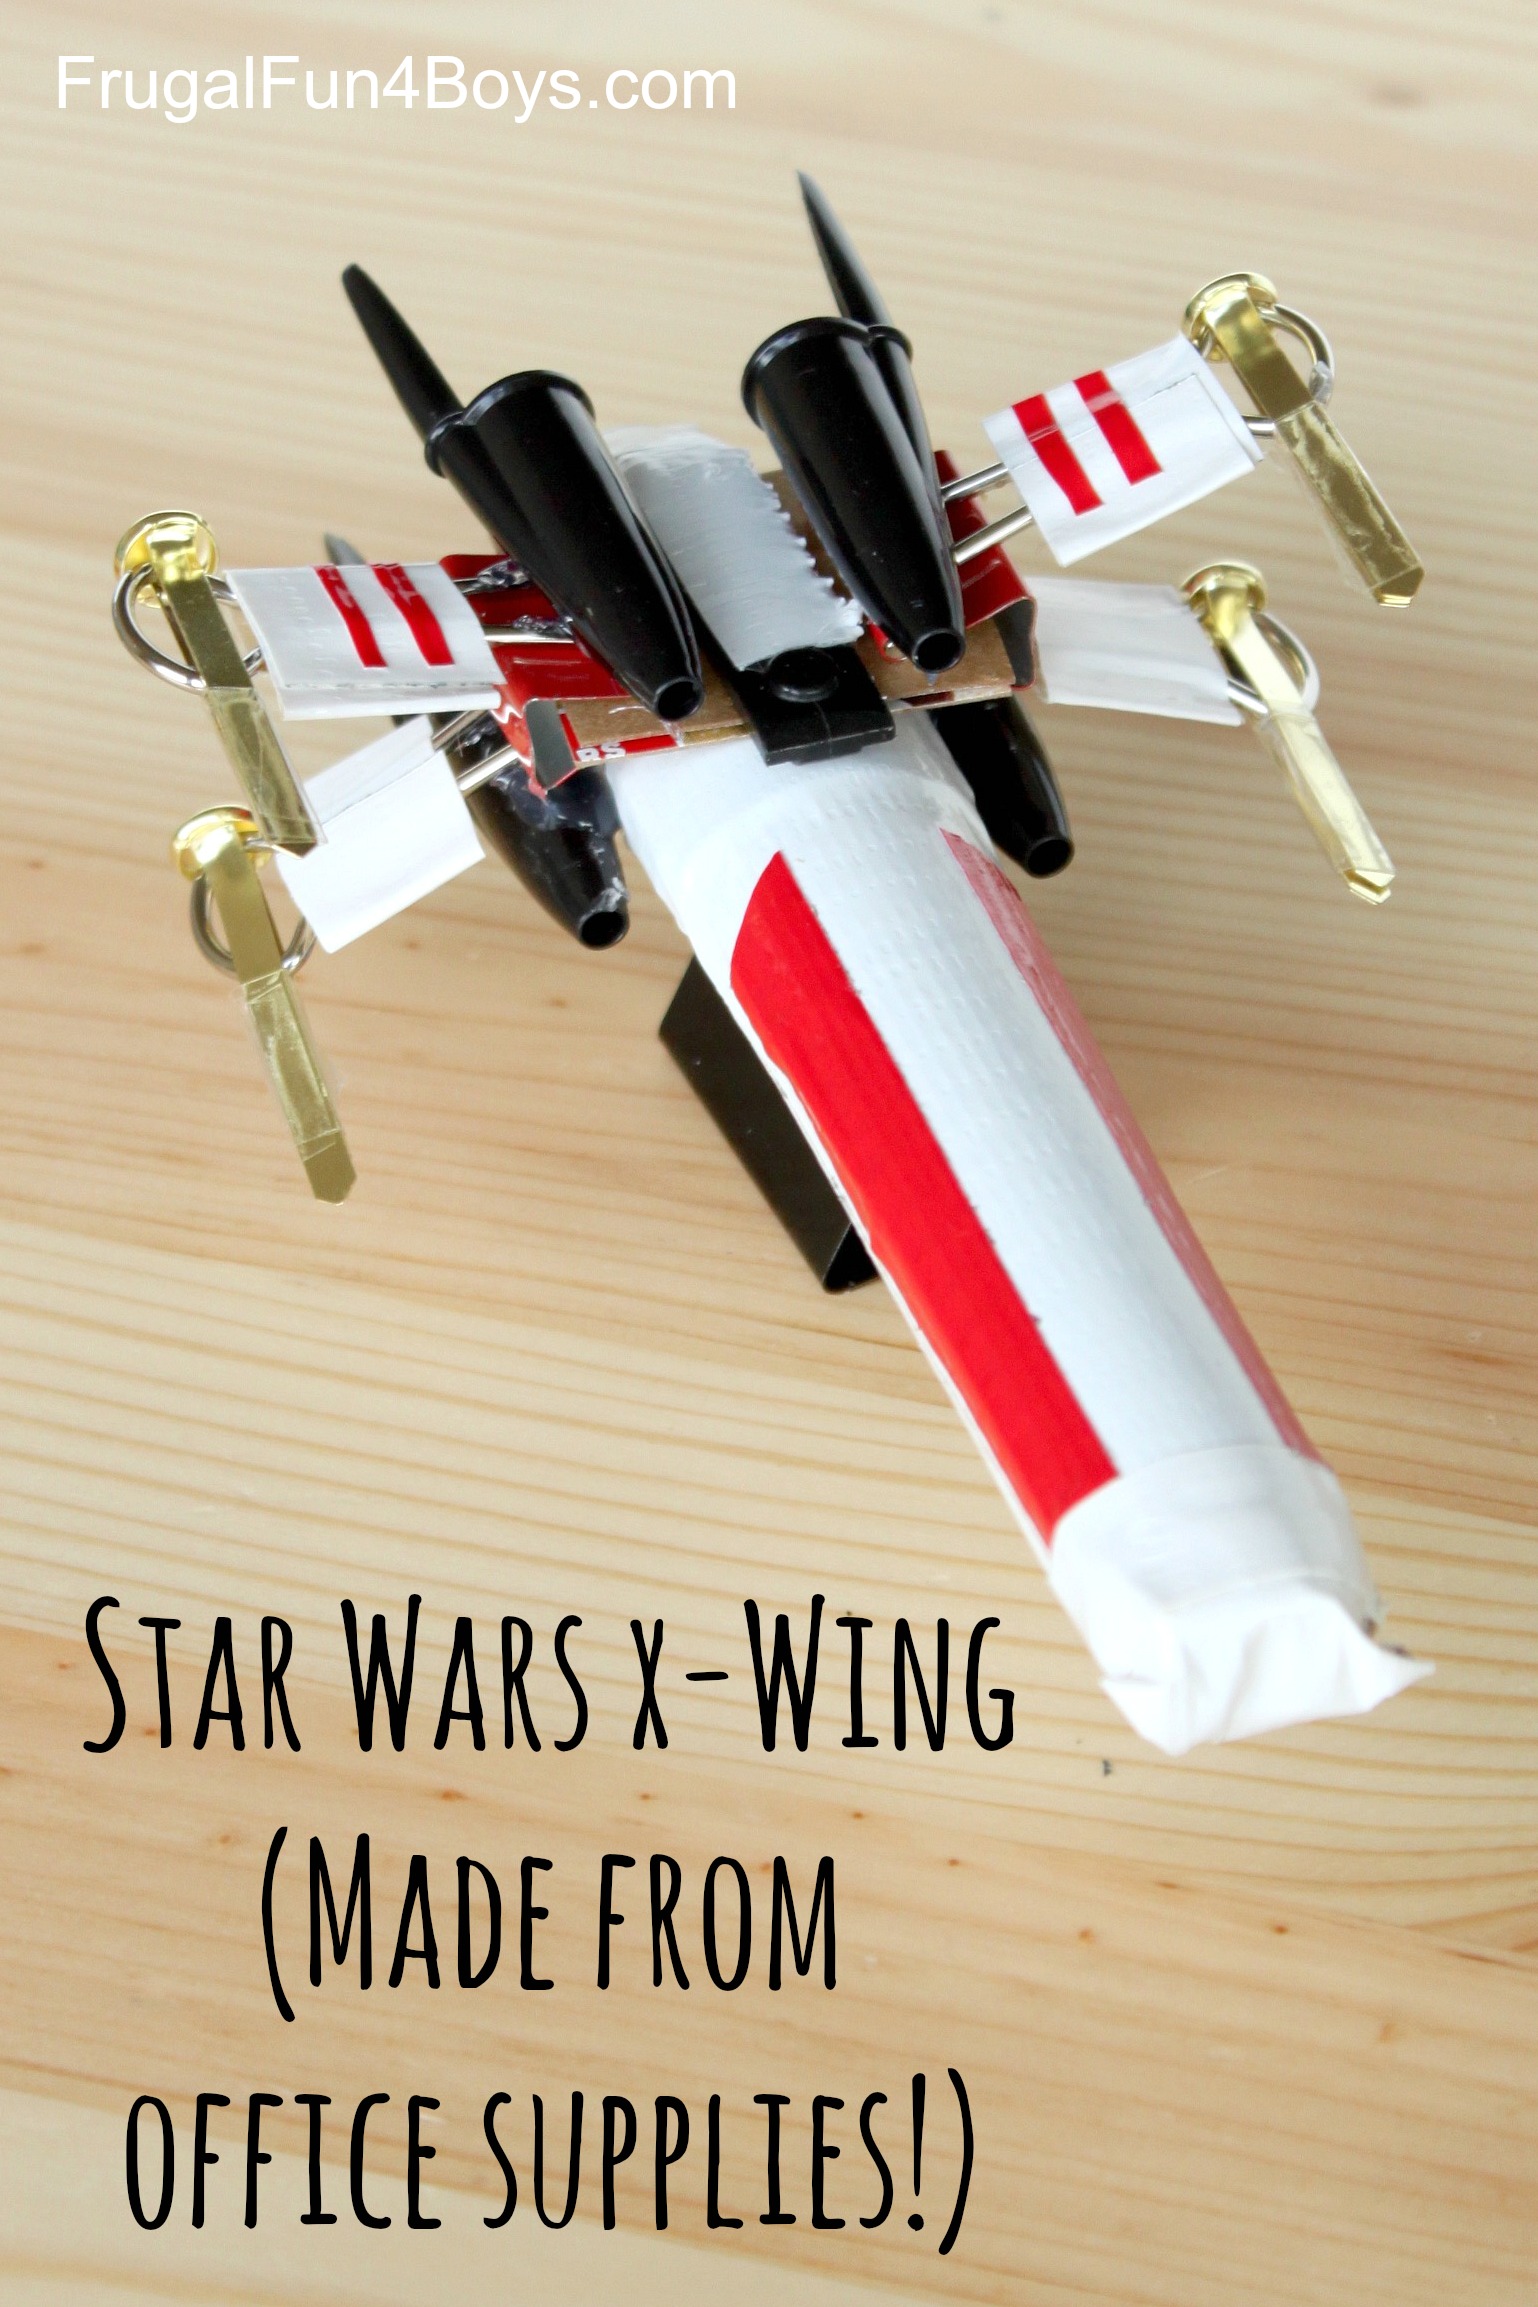 How to Make a Star Wars X-Wing out of Office Supplies